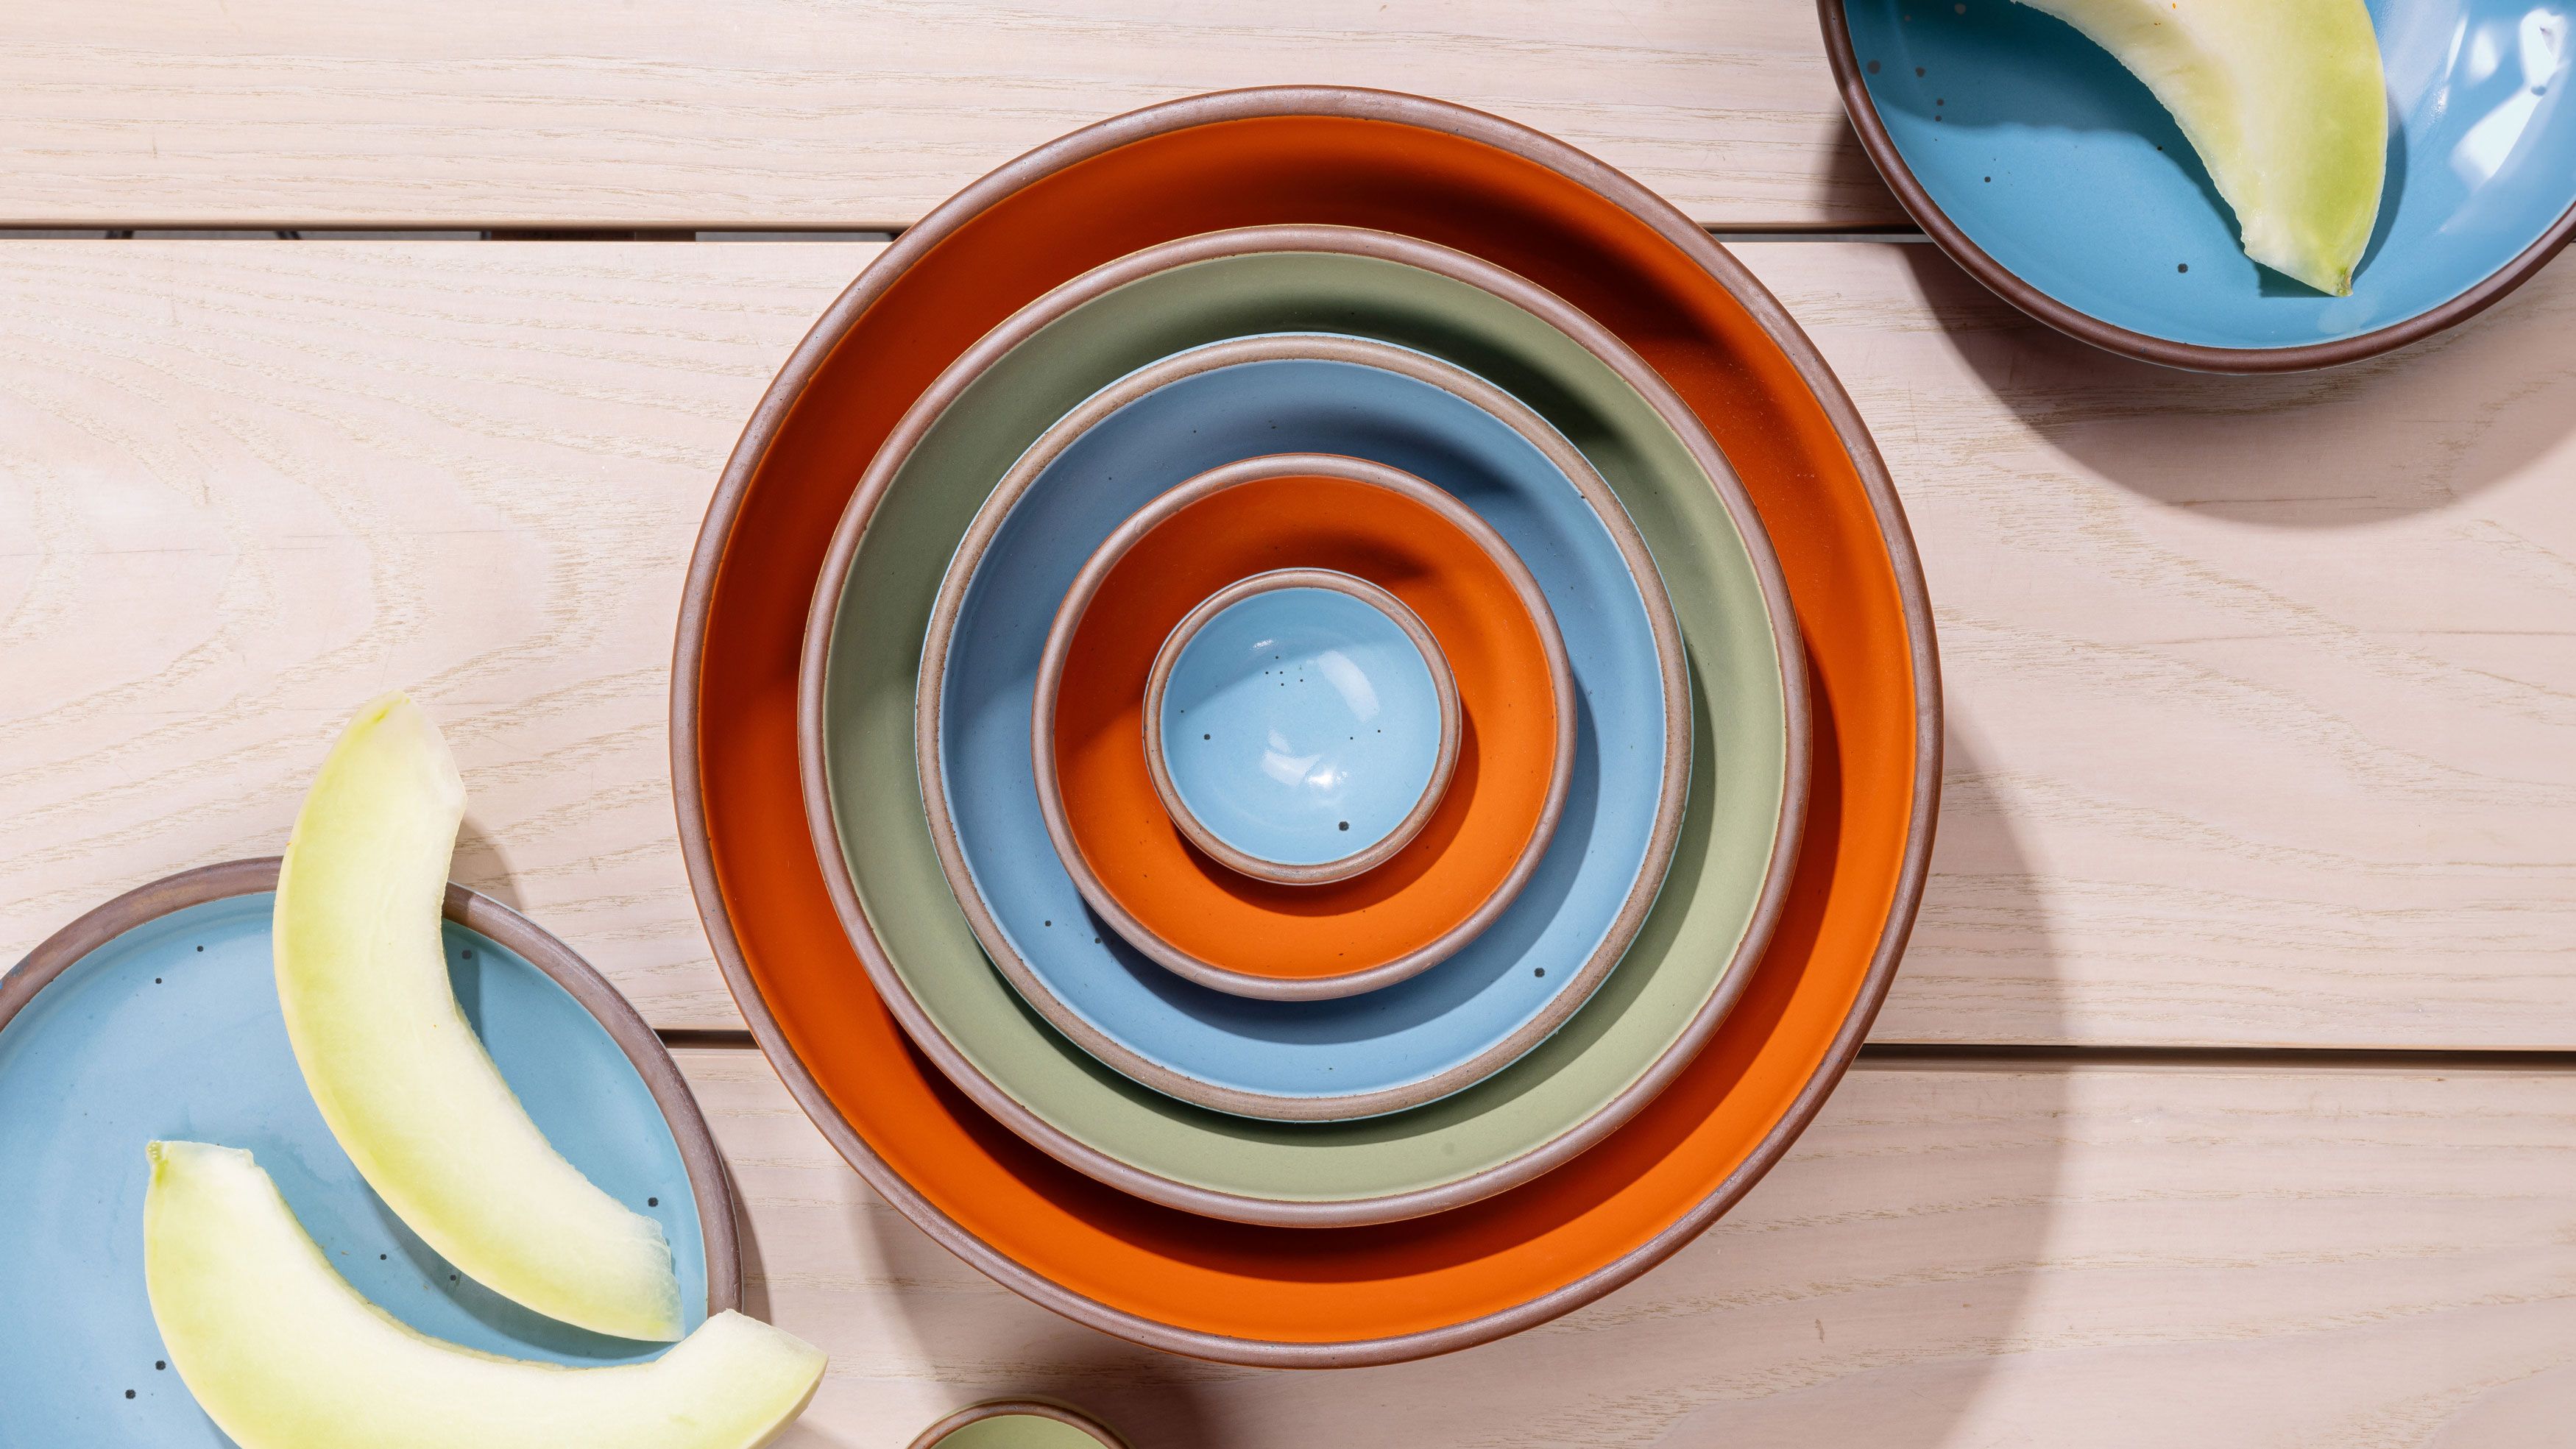 An overhead view of a nesting bowl set featuring 5 bowls - the largest being a kitchen mixing bowl, and the smallest being a tiny bowl for spices. Colors range from bold orange, calming sage green, and a robin's egg blue.